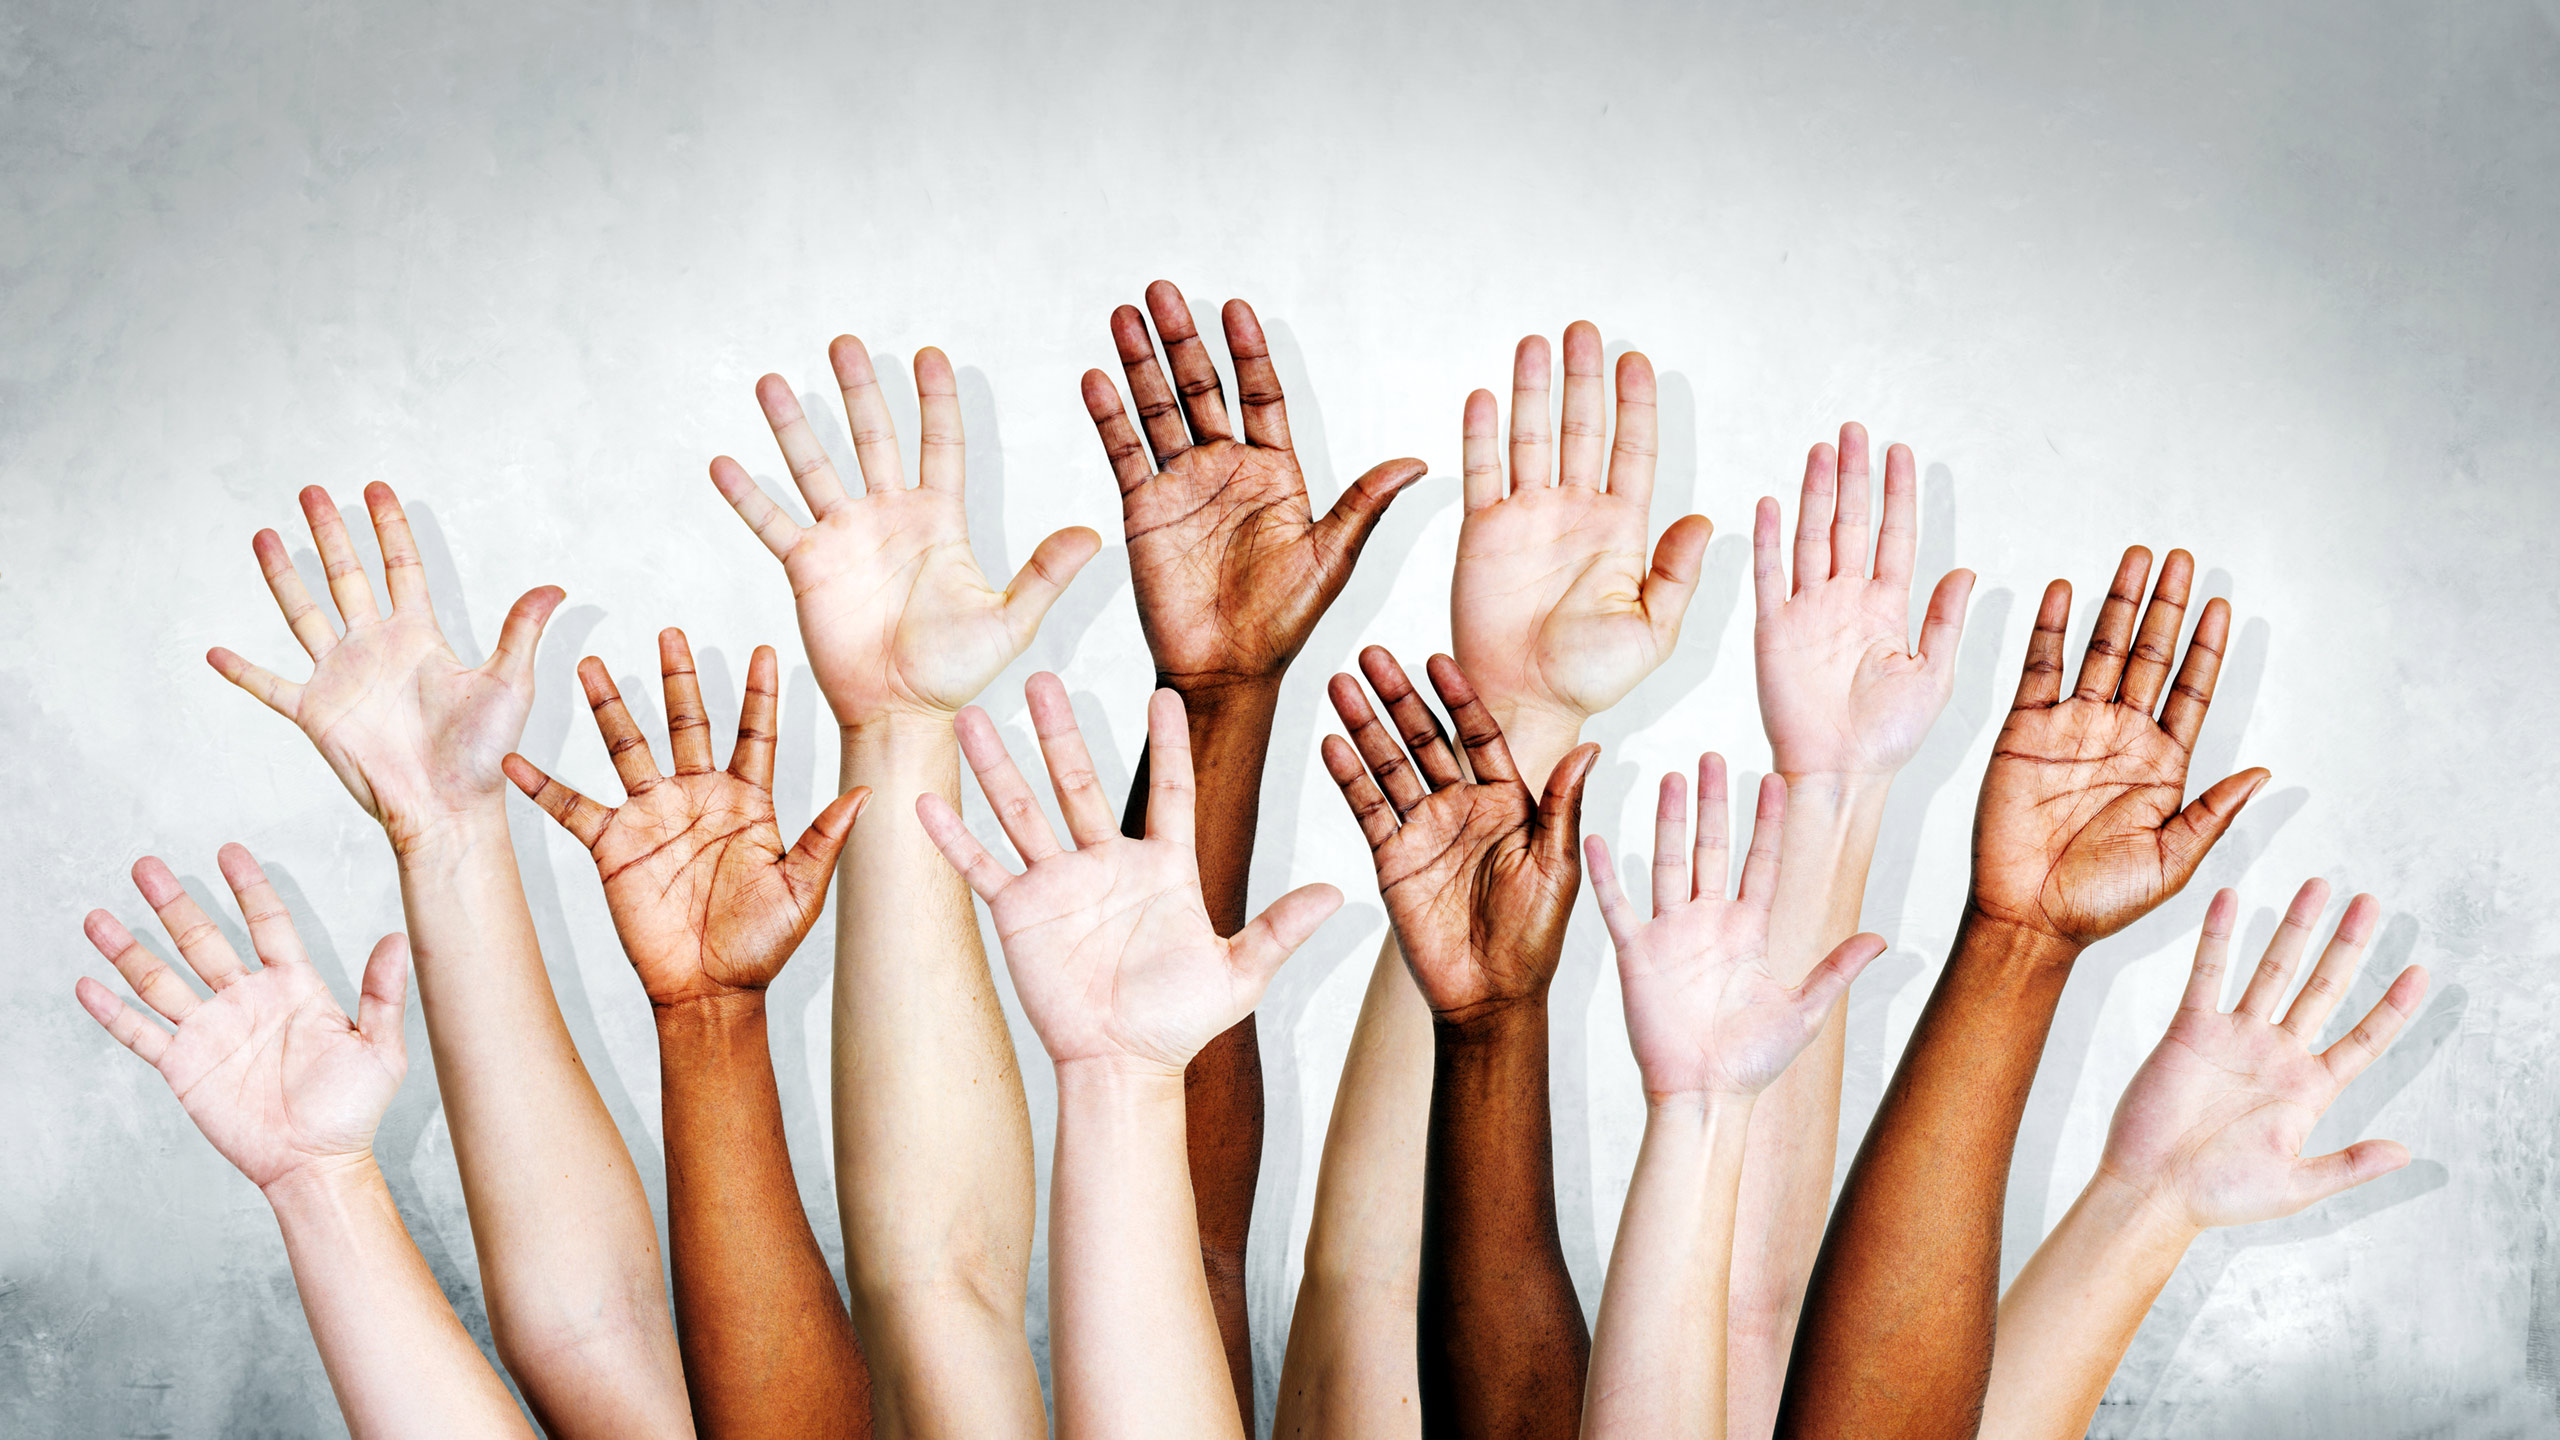 A group of hands raised in the air asking questions